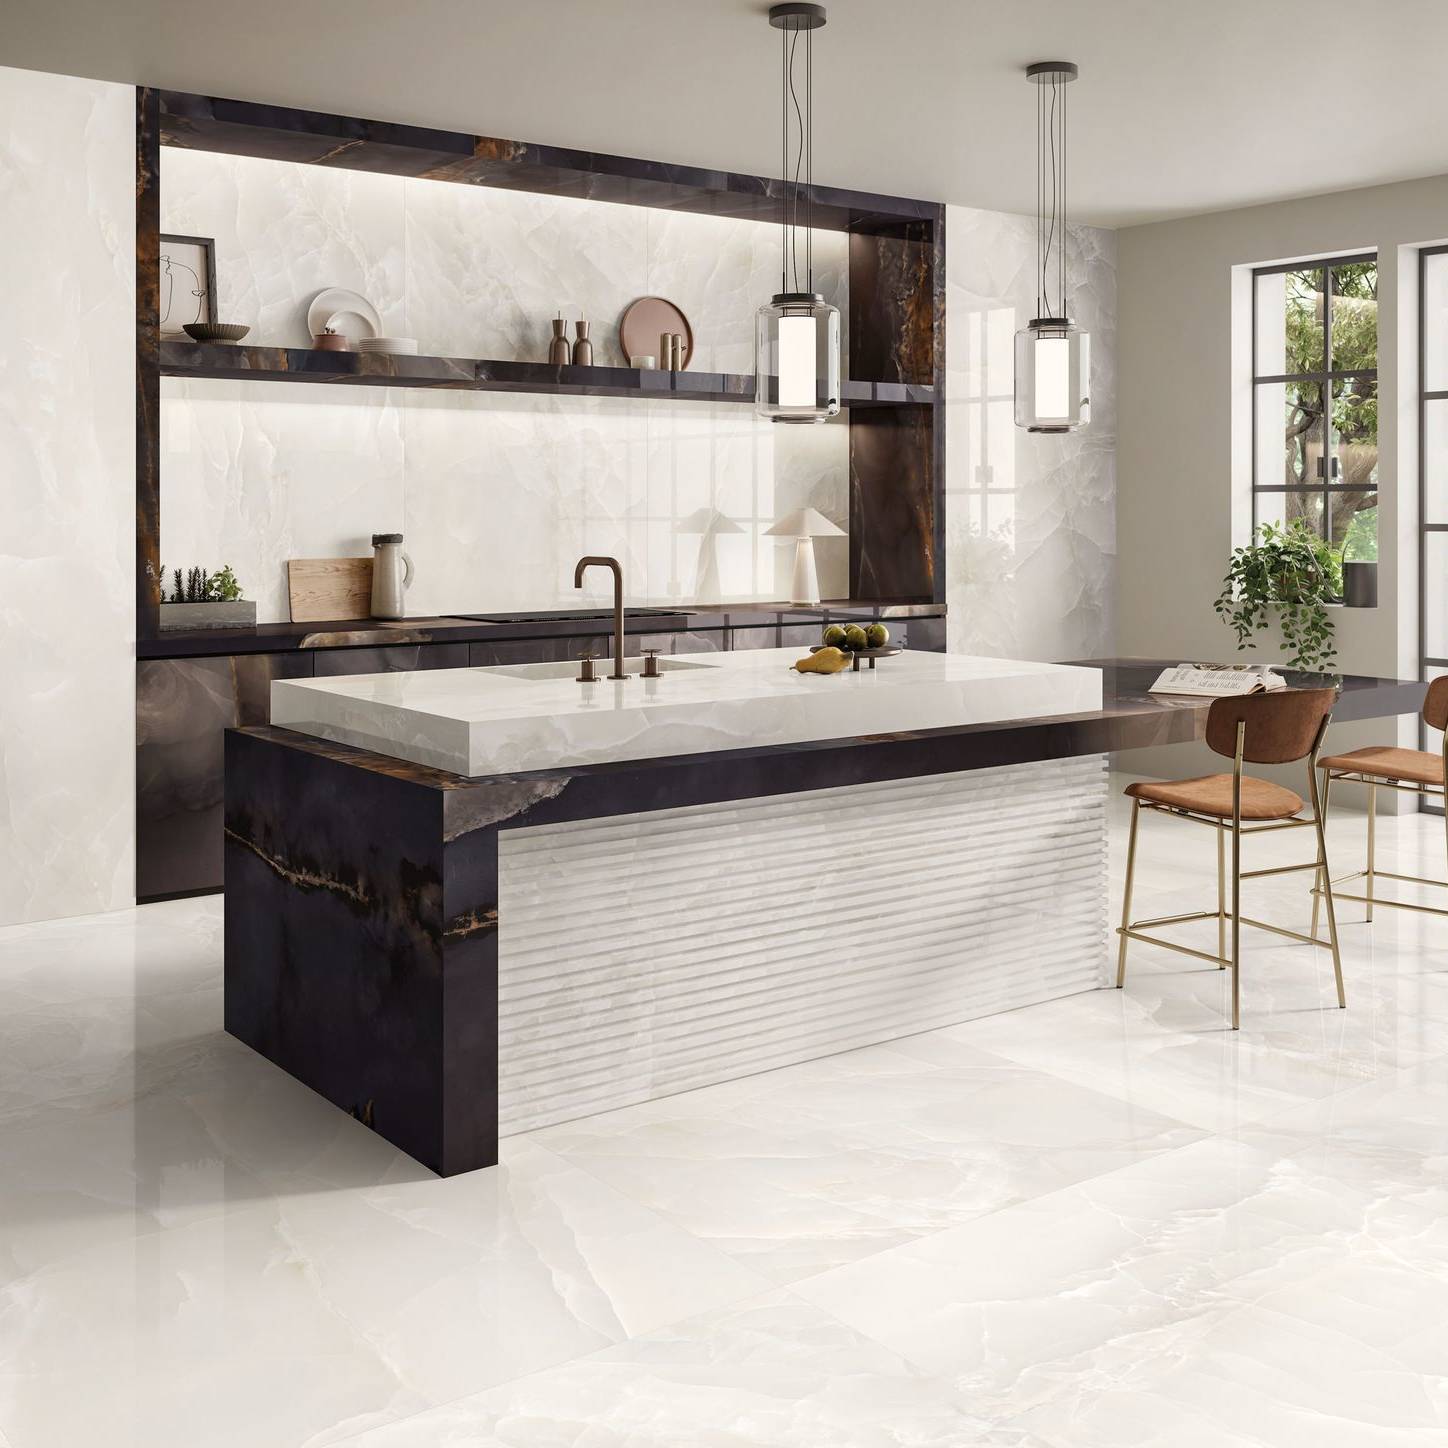 Onyx 17 | Stones And More | Finest selection of Mosaics, Glass, Tile and Stone